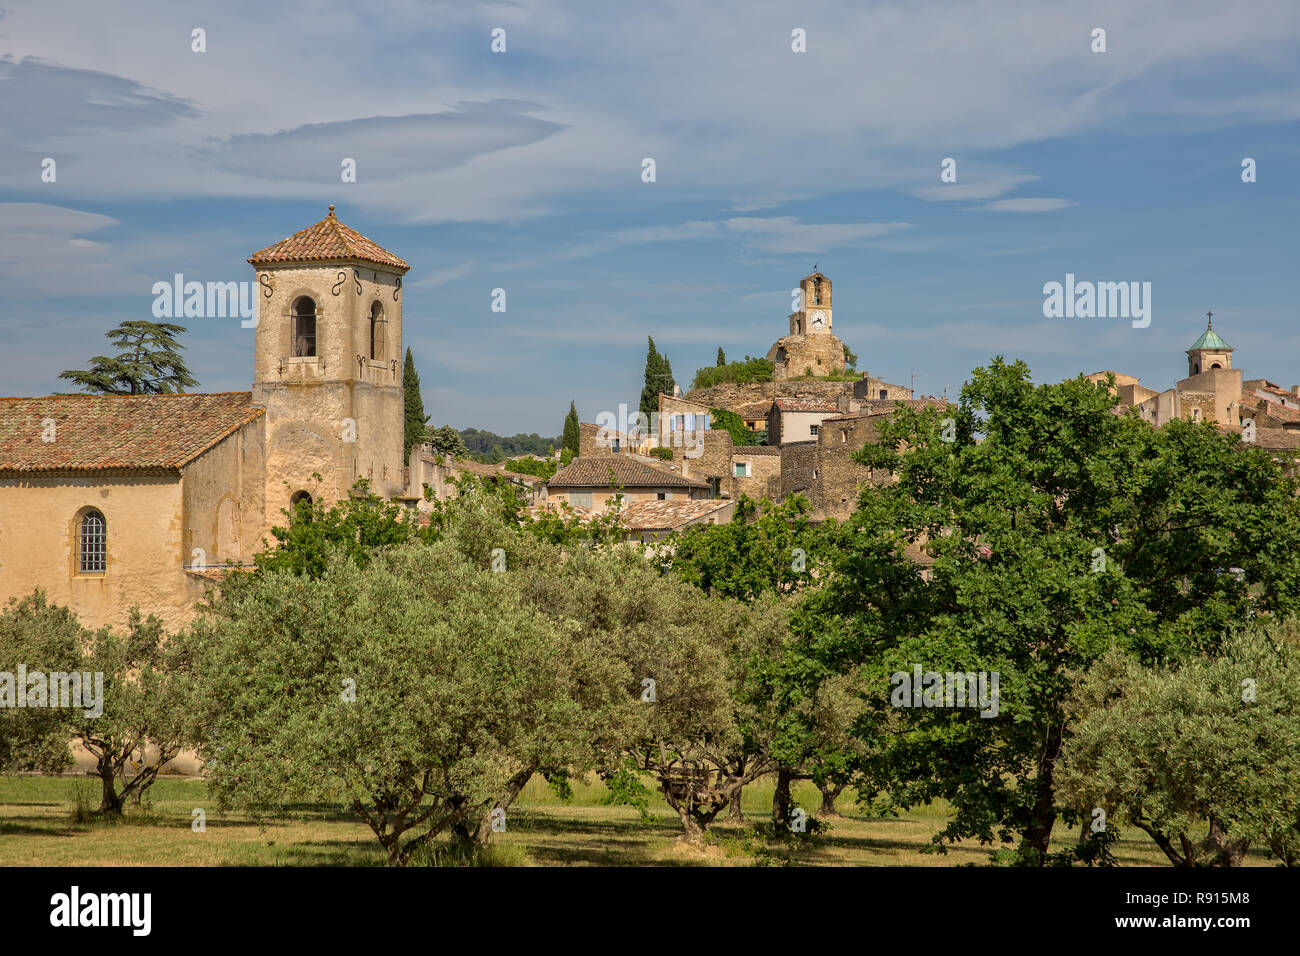 Belfry of the Protestant Church and Clock Tower in the idyllic village of Lourmarin, Provence, Luberon, Vaucluse, France Stock Photo